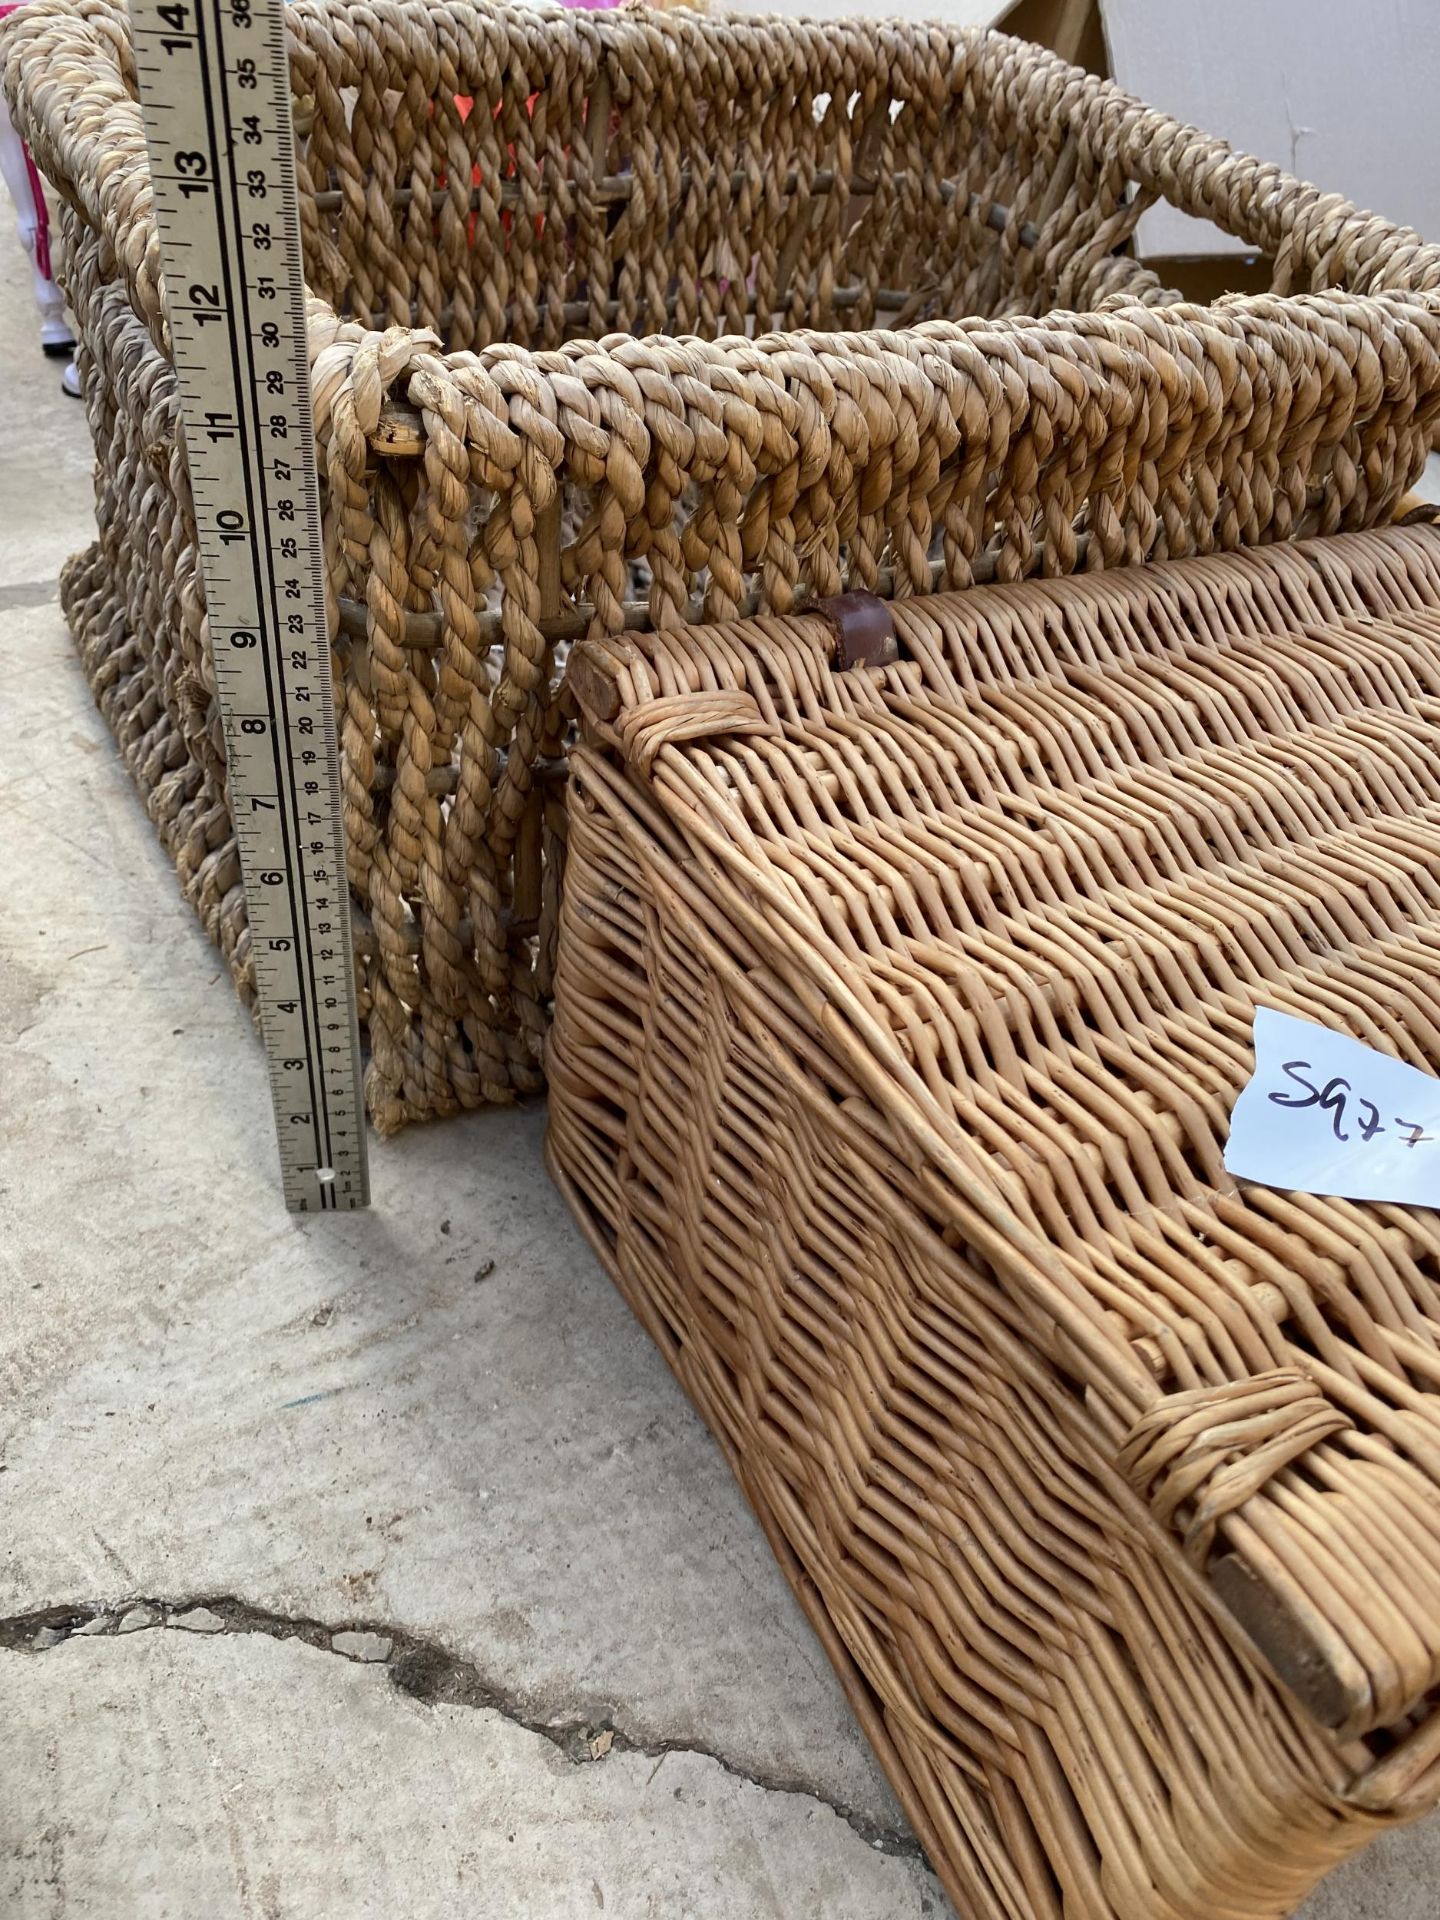 A WICKER PICNIC BASKET AND A FURTHER WICKER EFFECT LOG BASKET - Image 5 of 5